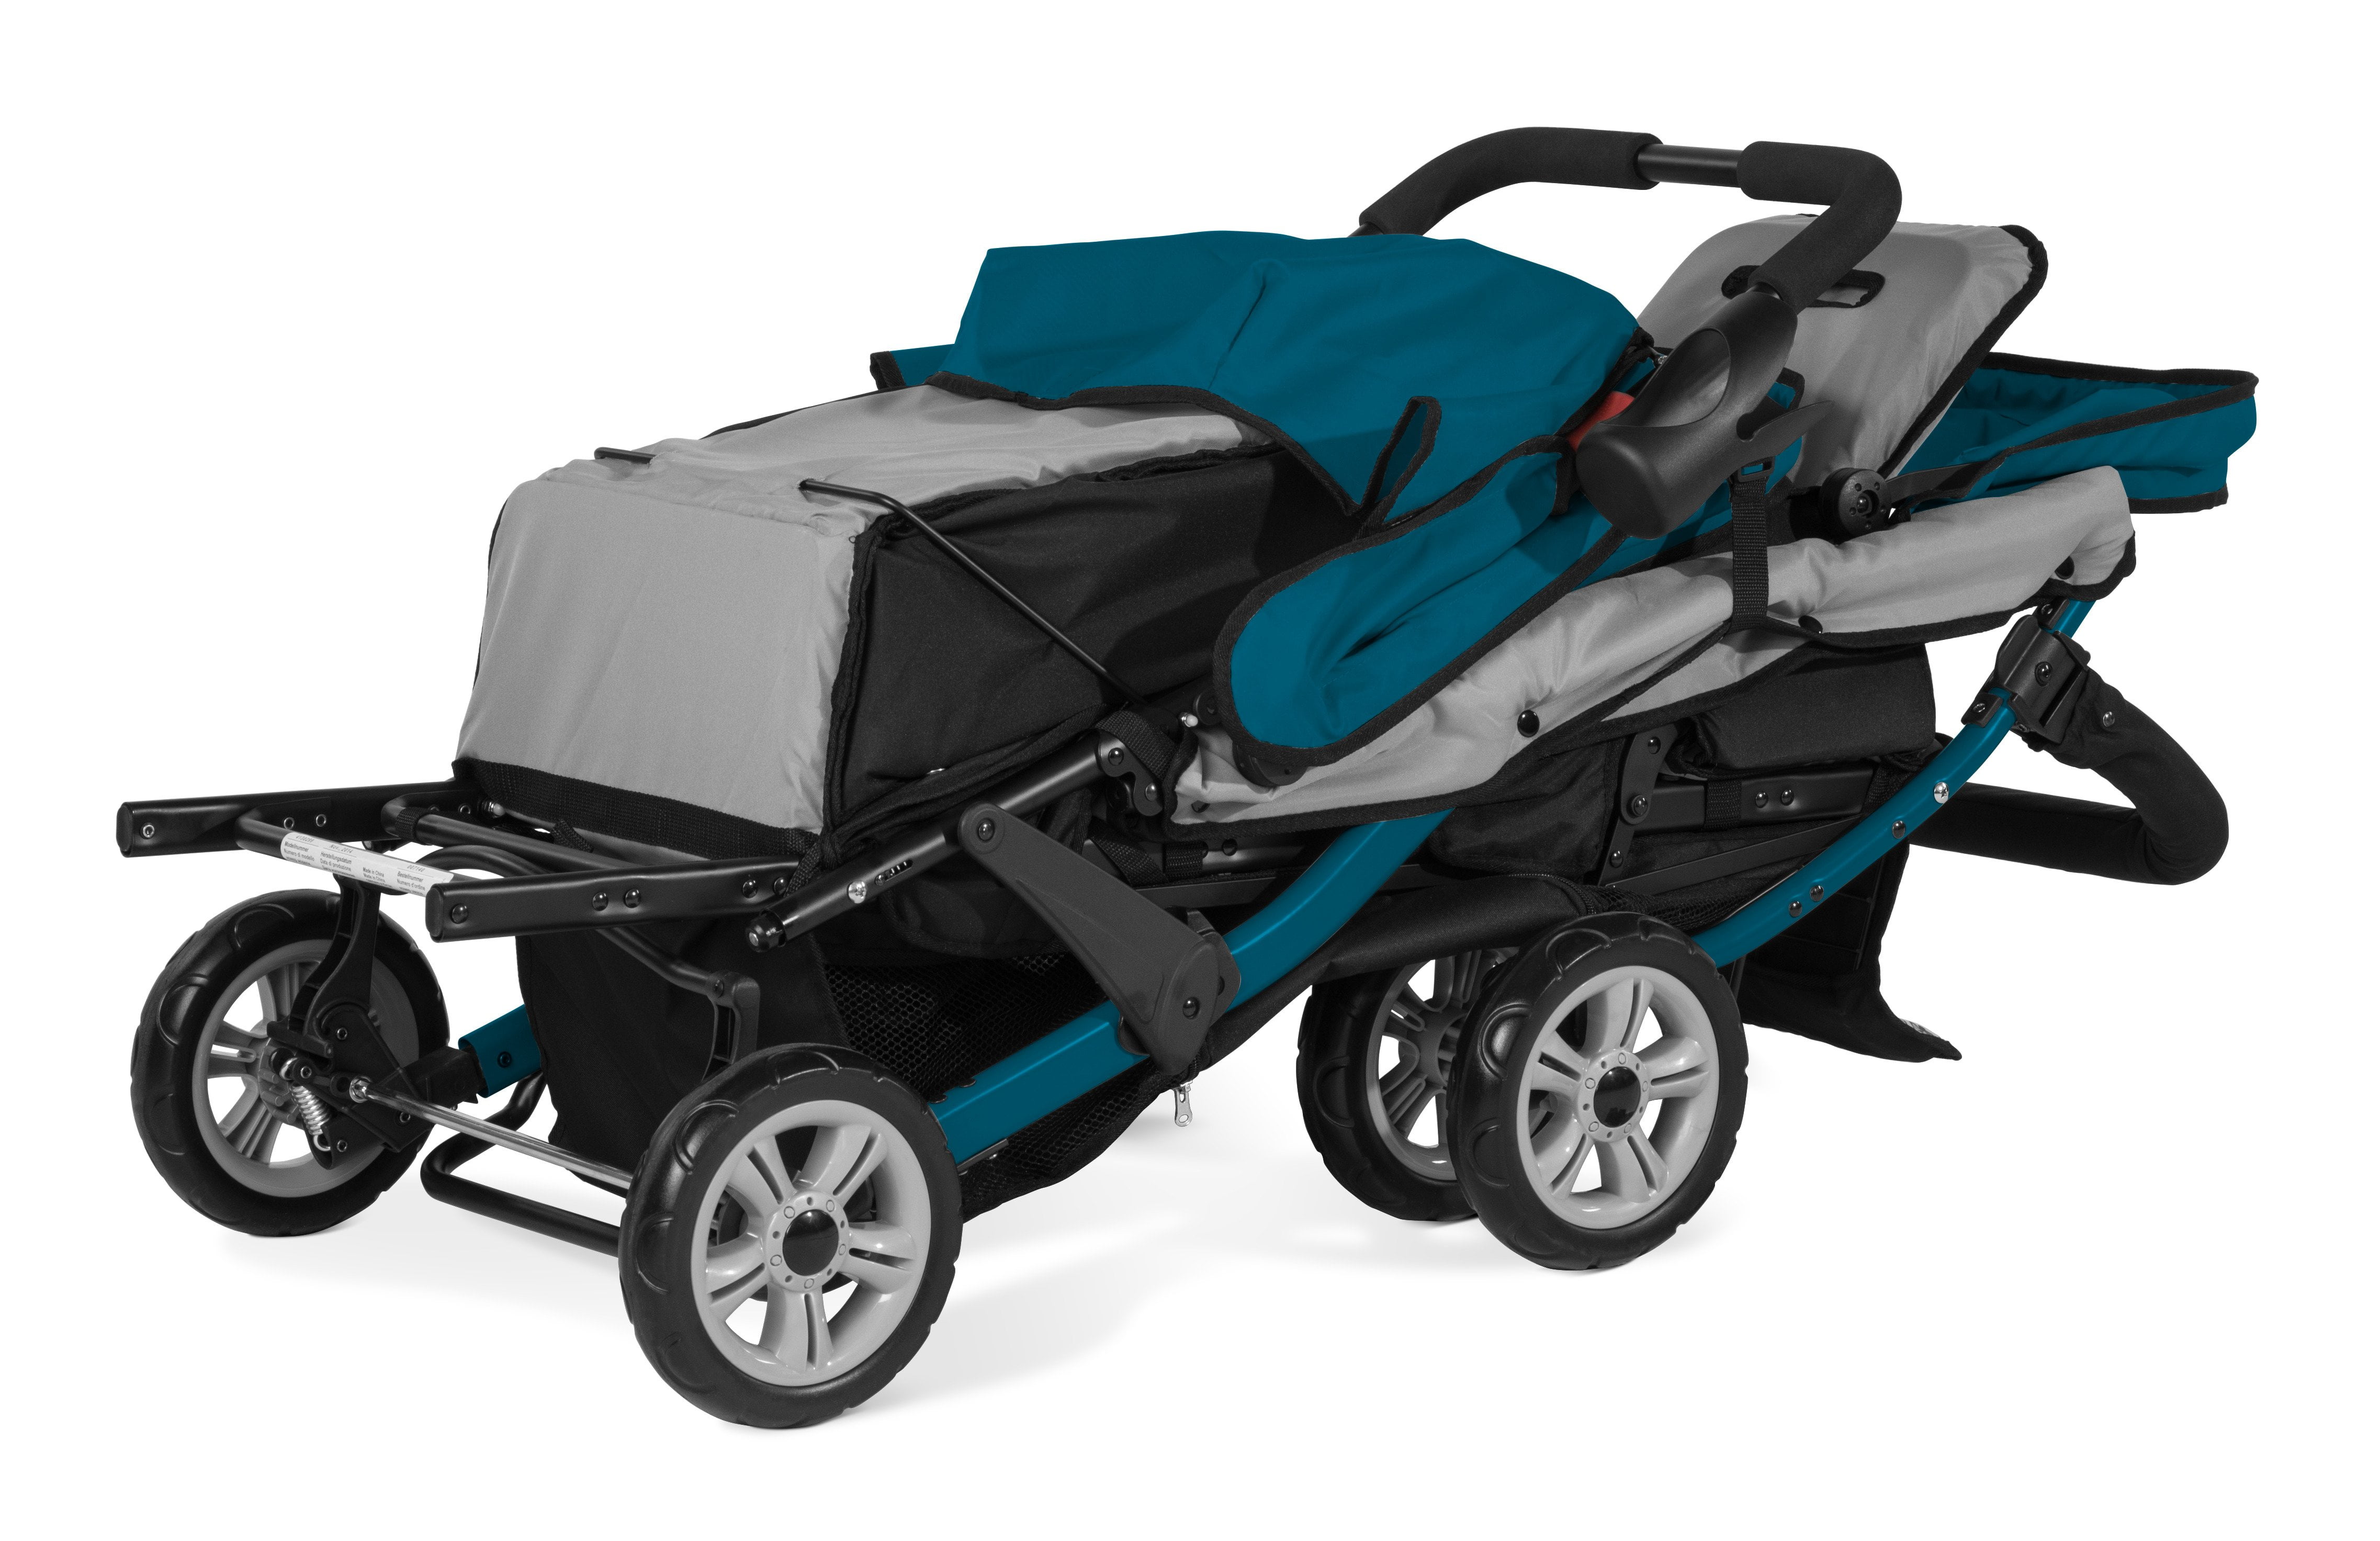 Familidoo H3E 3 Seat Baby Stroller - Double Canopy Triplet Stroller with  Reclining Seats - Daycare Strollers for 3 Kids - Safety Harness for Safe  and